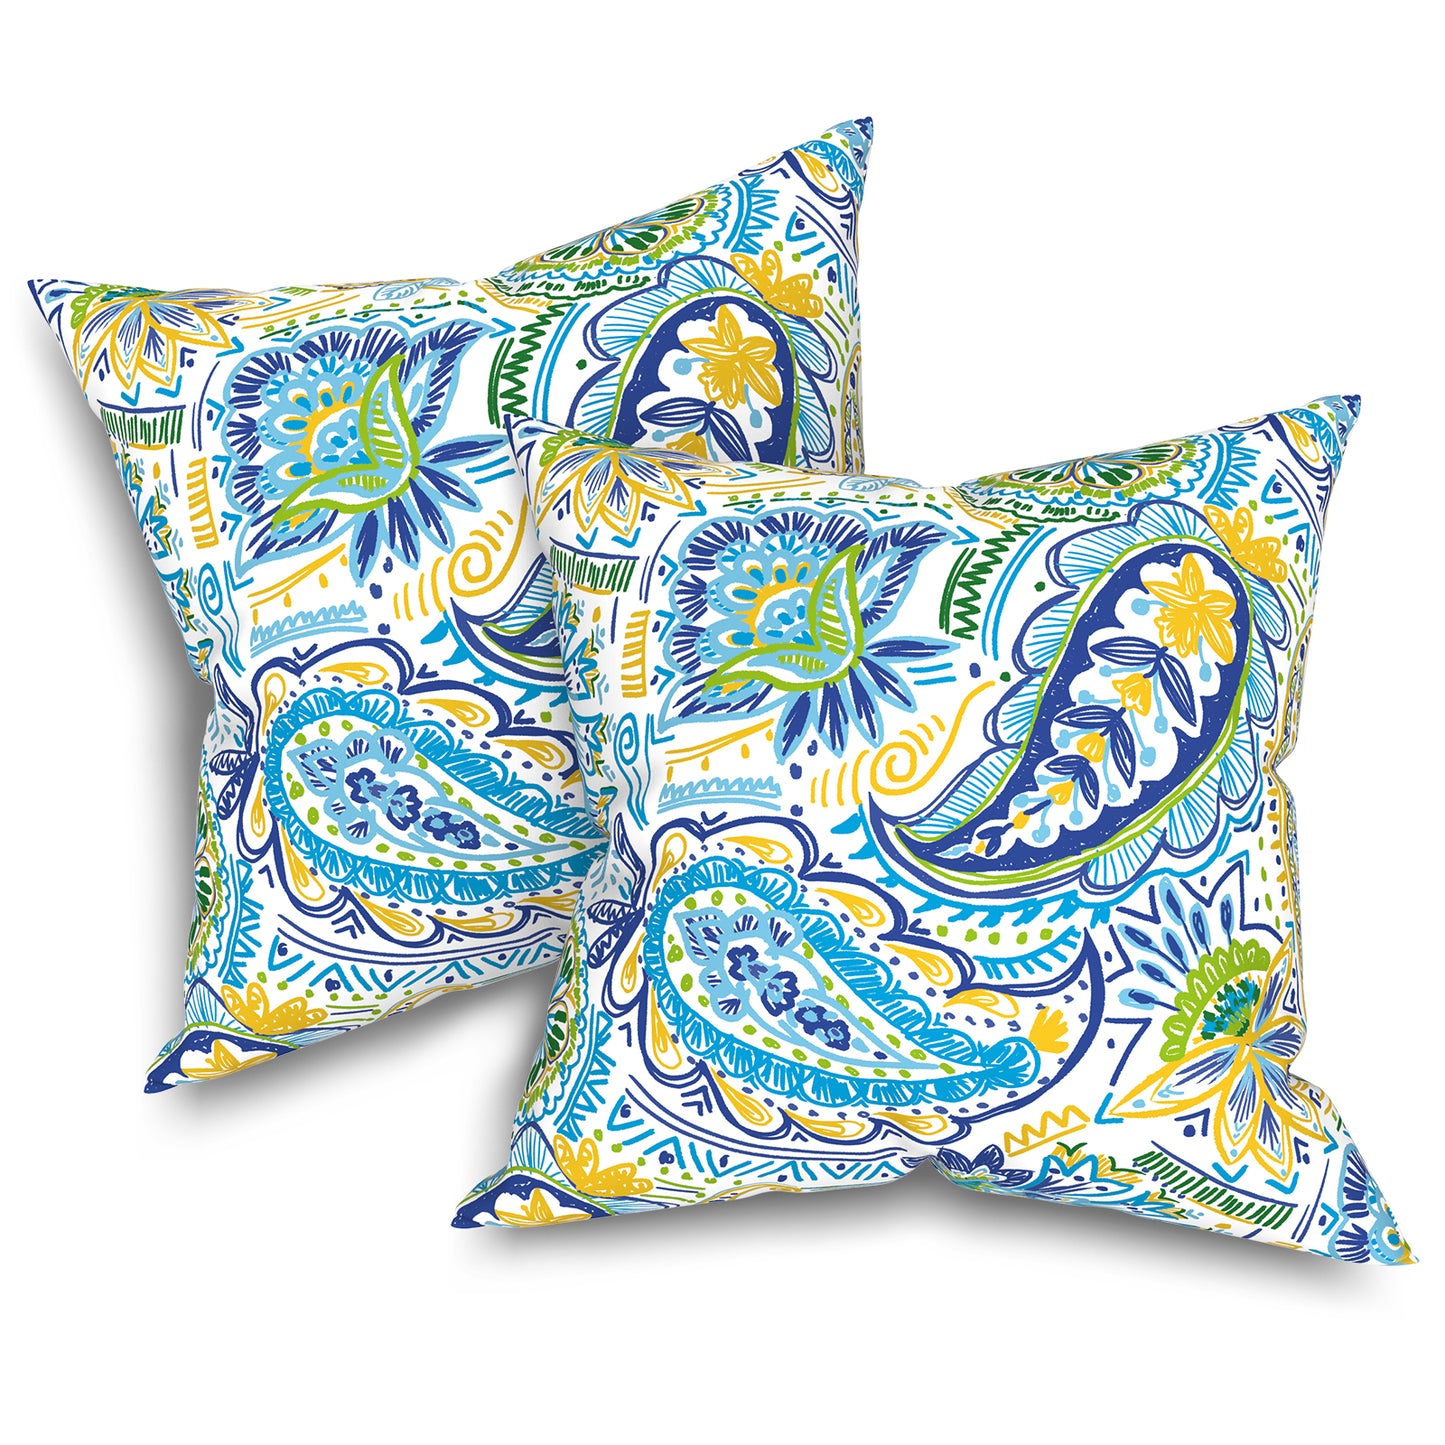 Melody Elephant Outdoor Throw Pillow Covers Pack of 2, Decorative Water Repellent Square Pillow Cases 18x18 Inch, Patio Pillowcases for Home Patio Furniture Use, Blue Paisley